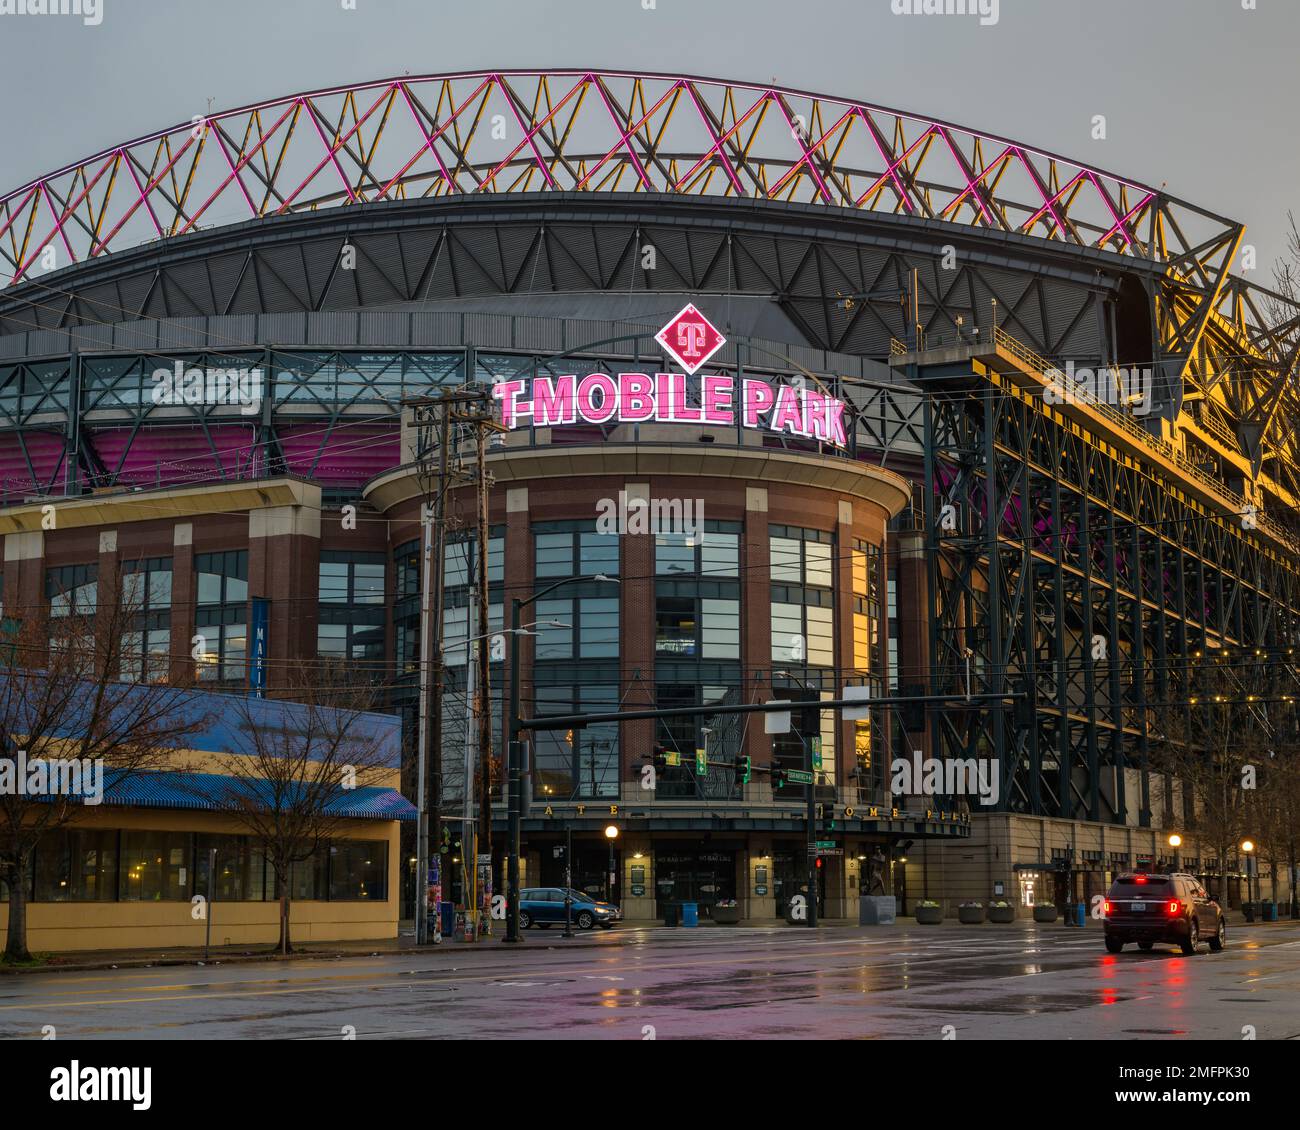 Seattle - January 15, 2023; T Mobile Park baseball stadium on a wet winter morning home of the Seattle Mariners with illuminated pink sign Stock Photo